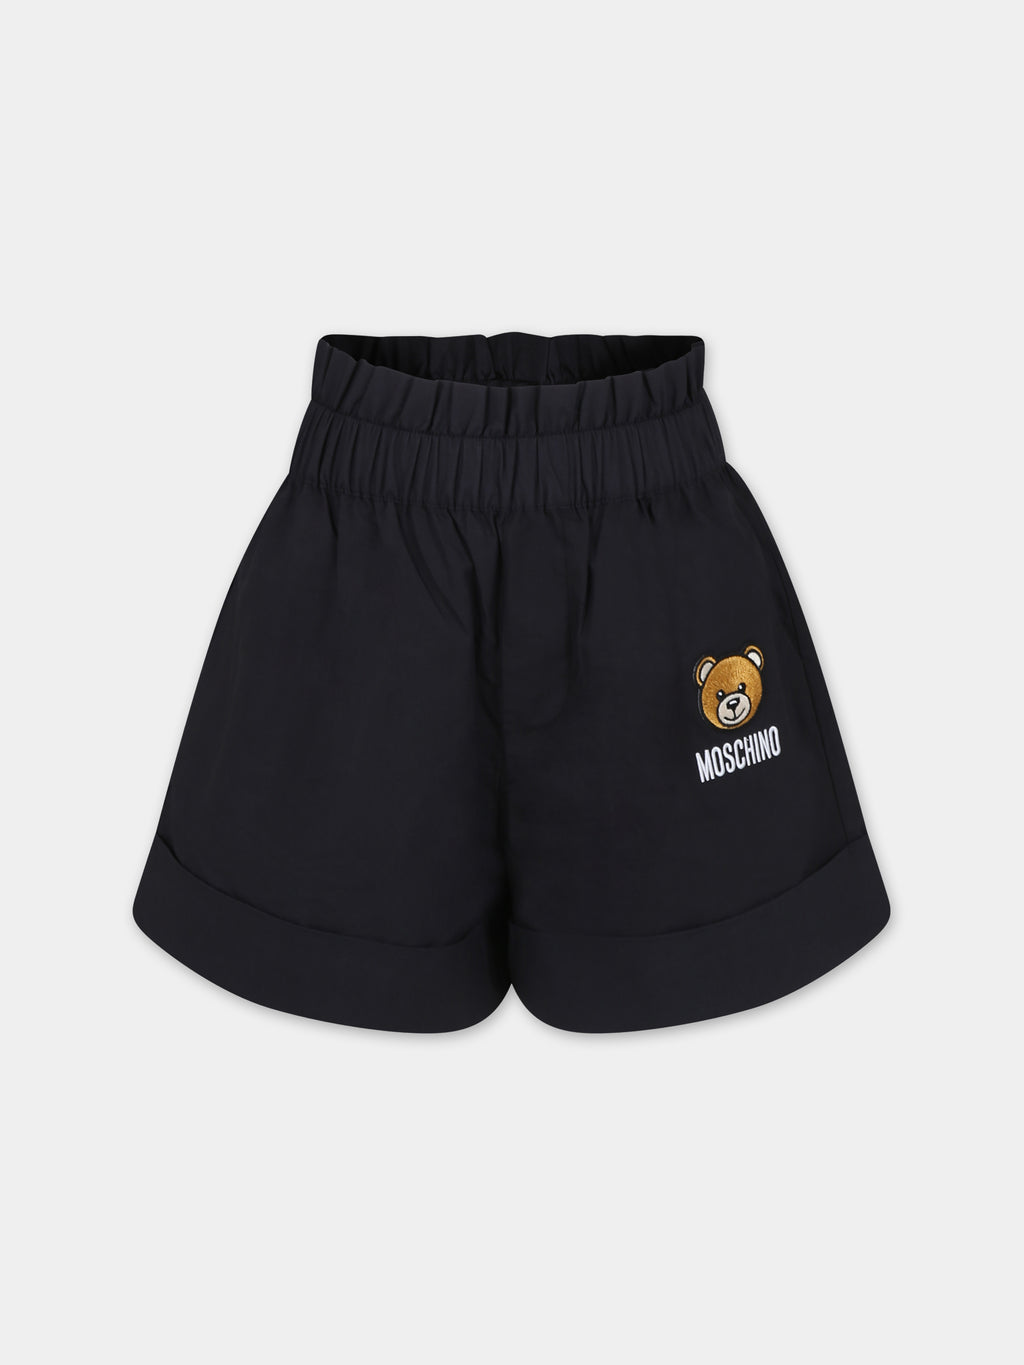 Black shorts for girl with Teddy Bear and logo